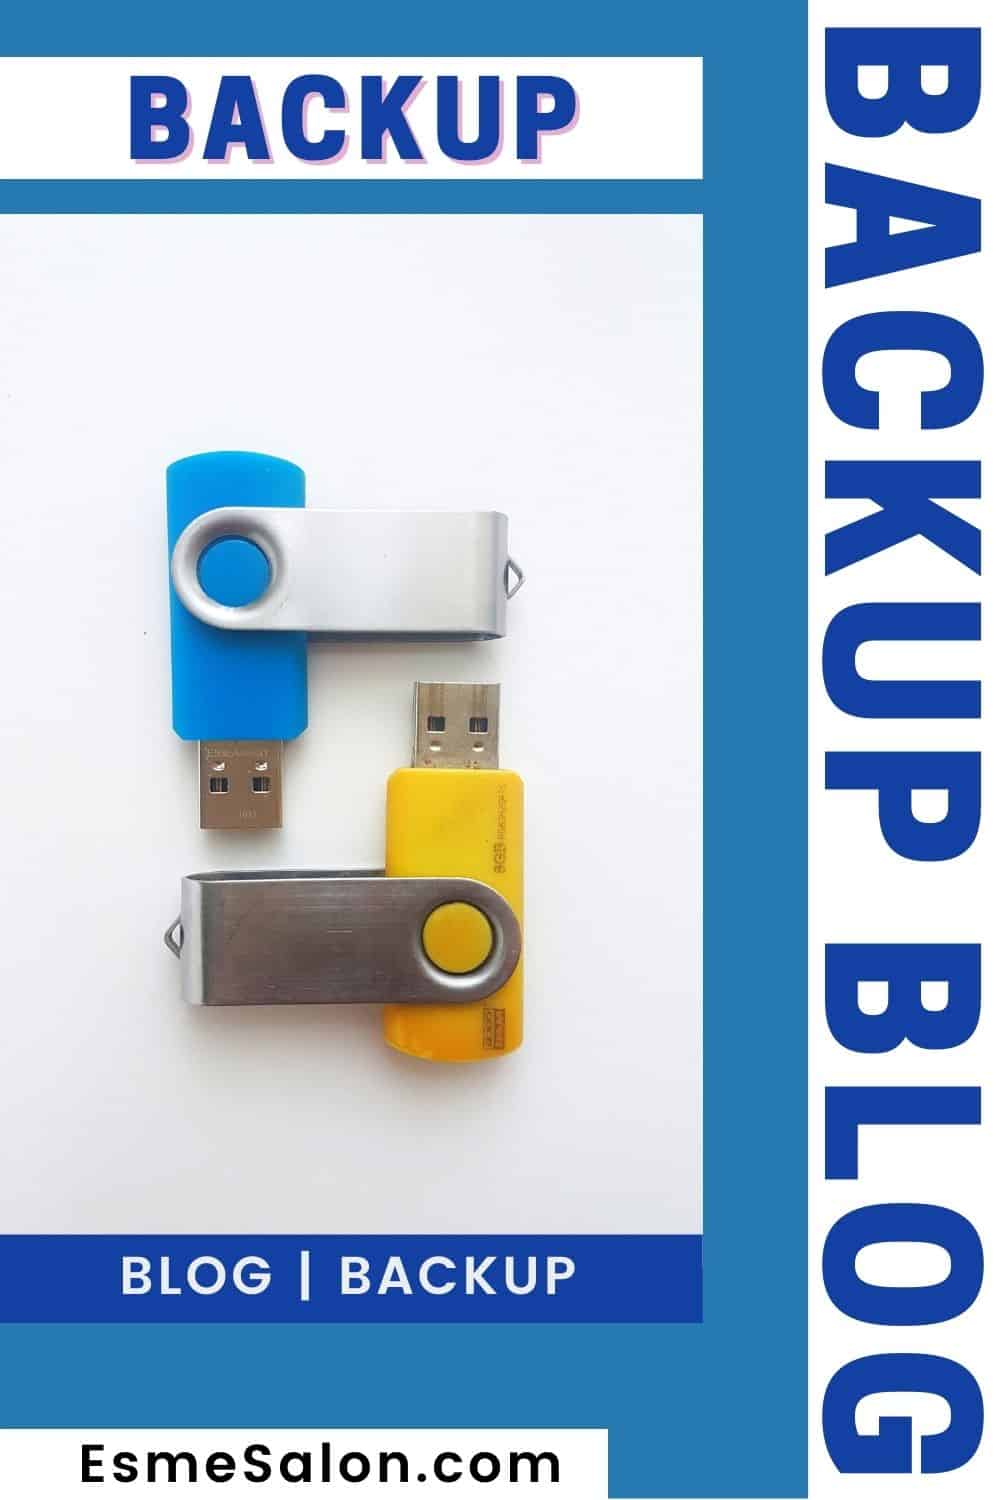 a blue and yellow USB drive